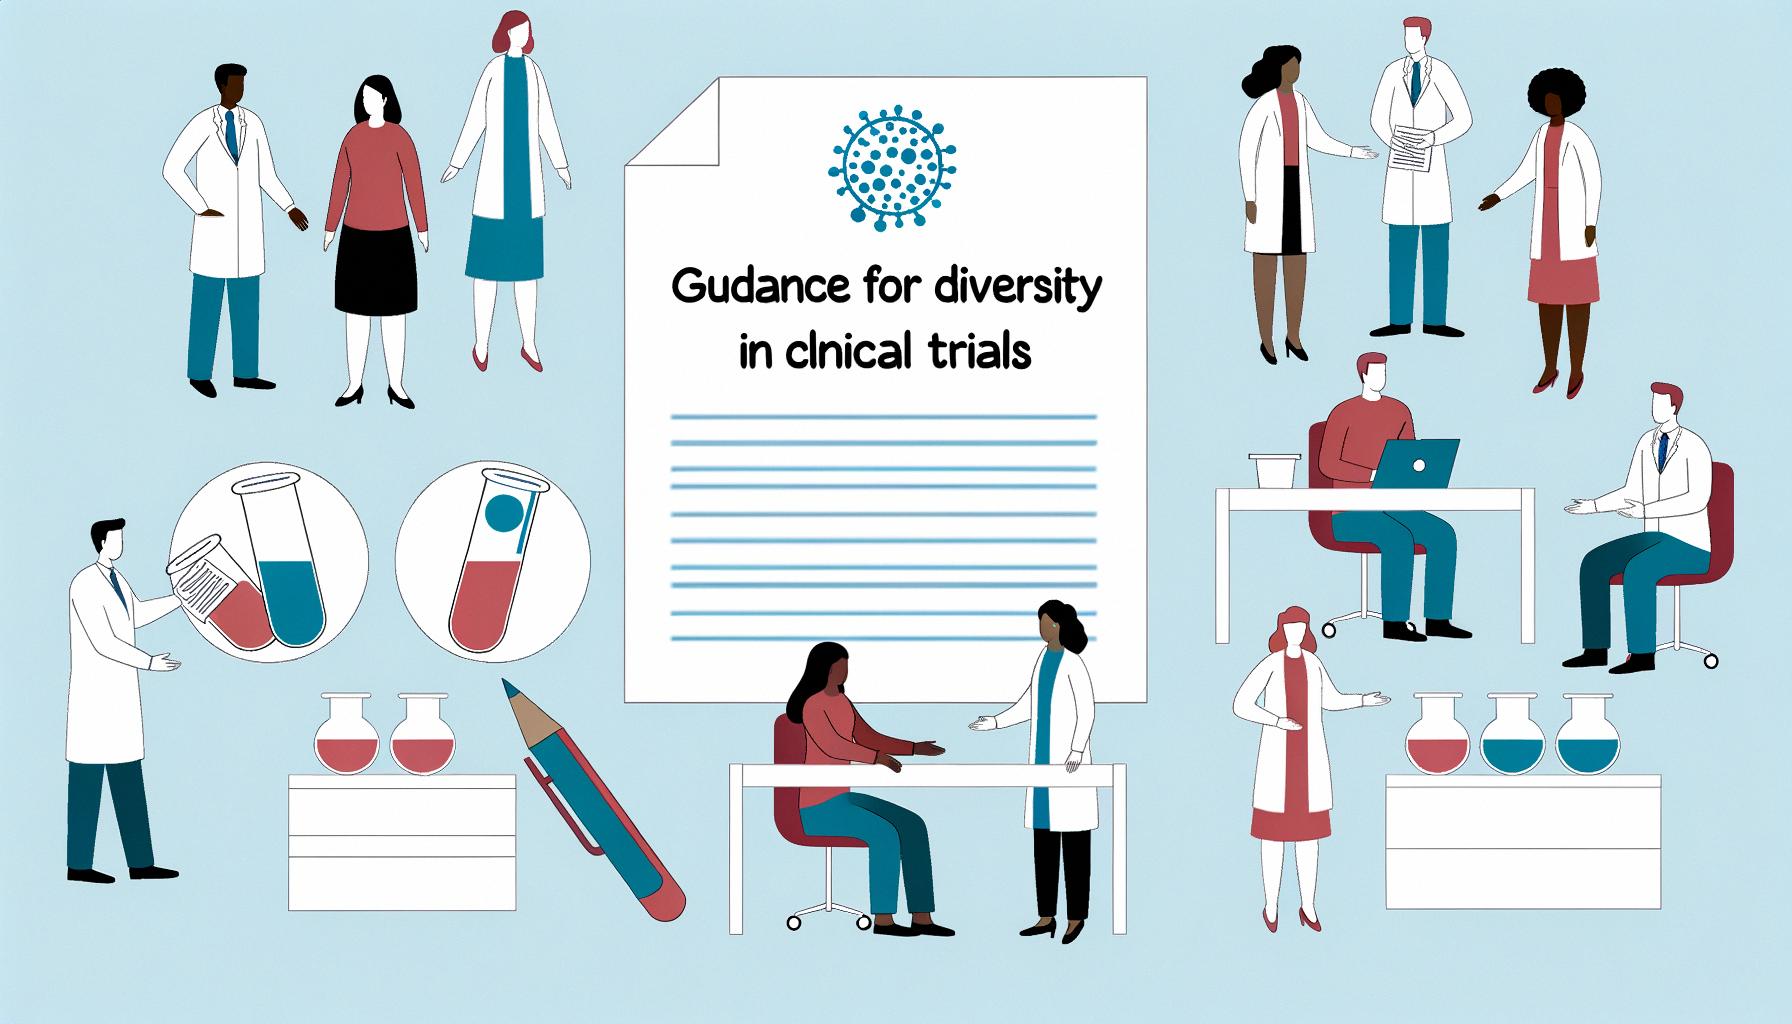 FDA releases draft guidance on diversity in clinical trials for inclusive healthcare.